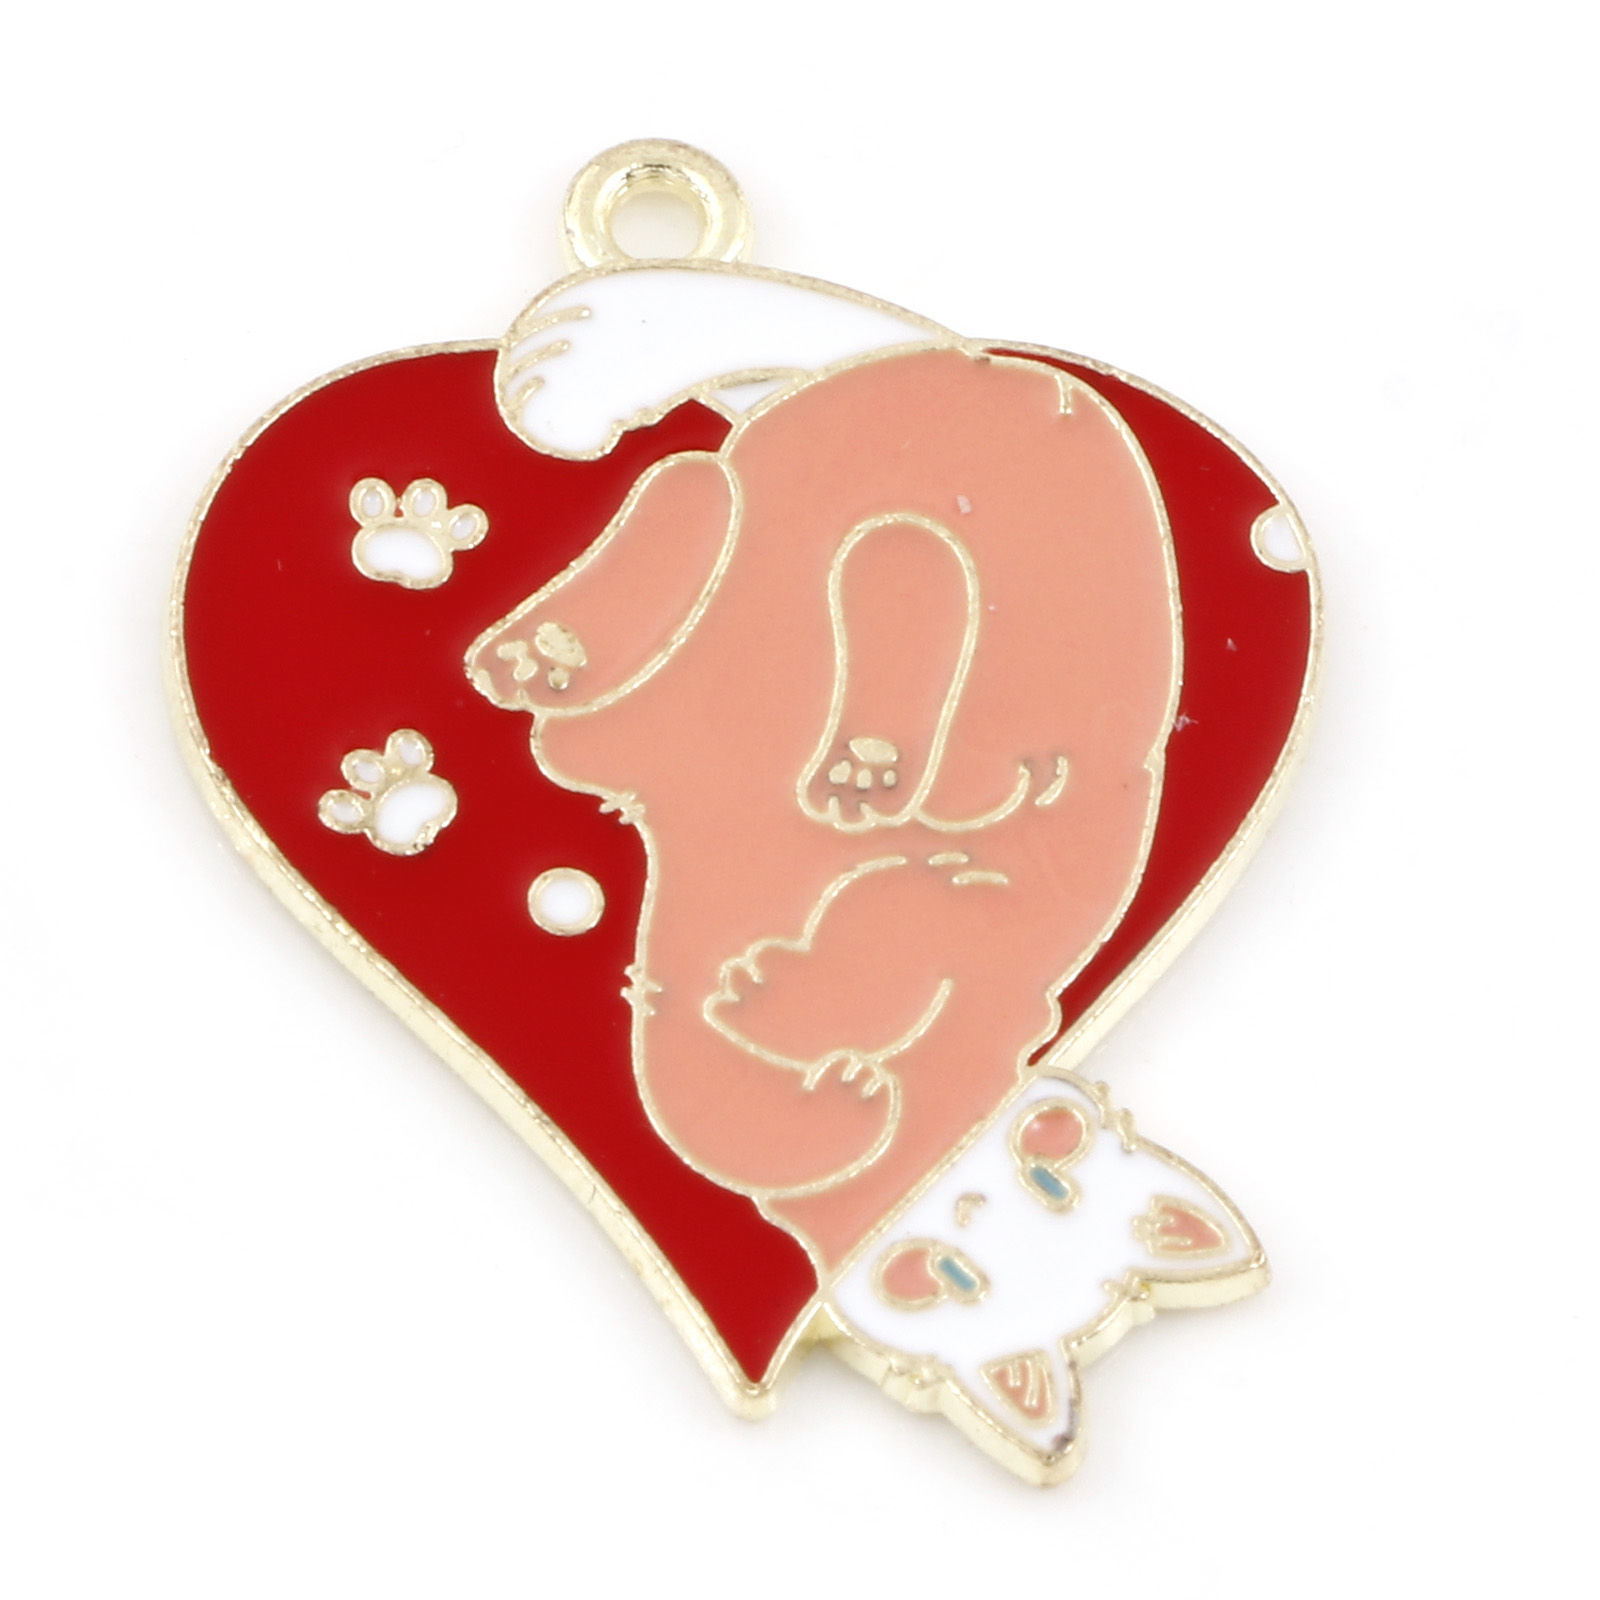 Picture of Zinc Based Alloy Poker/ Paper Card/ Game Card Pendants Gold Plated White & Red Cat Animal Heart Enamel 3.4cm x 2.6cm, 5 PCs